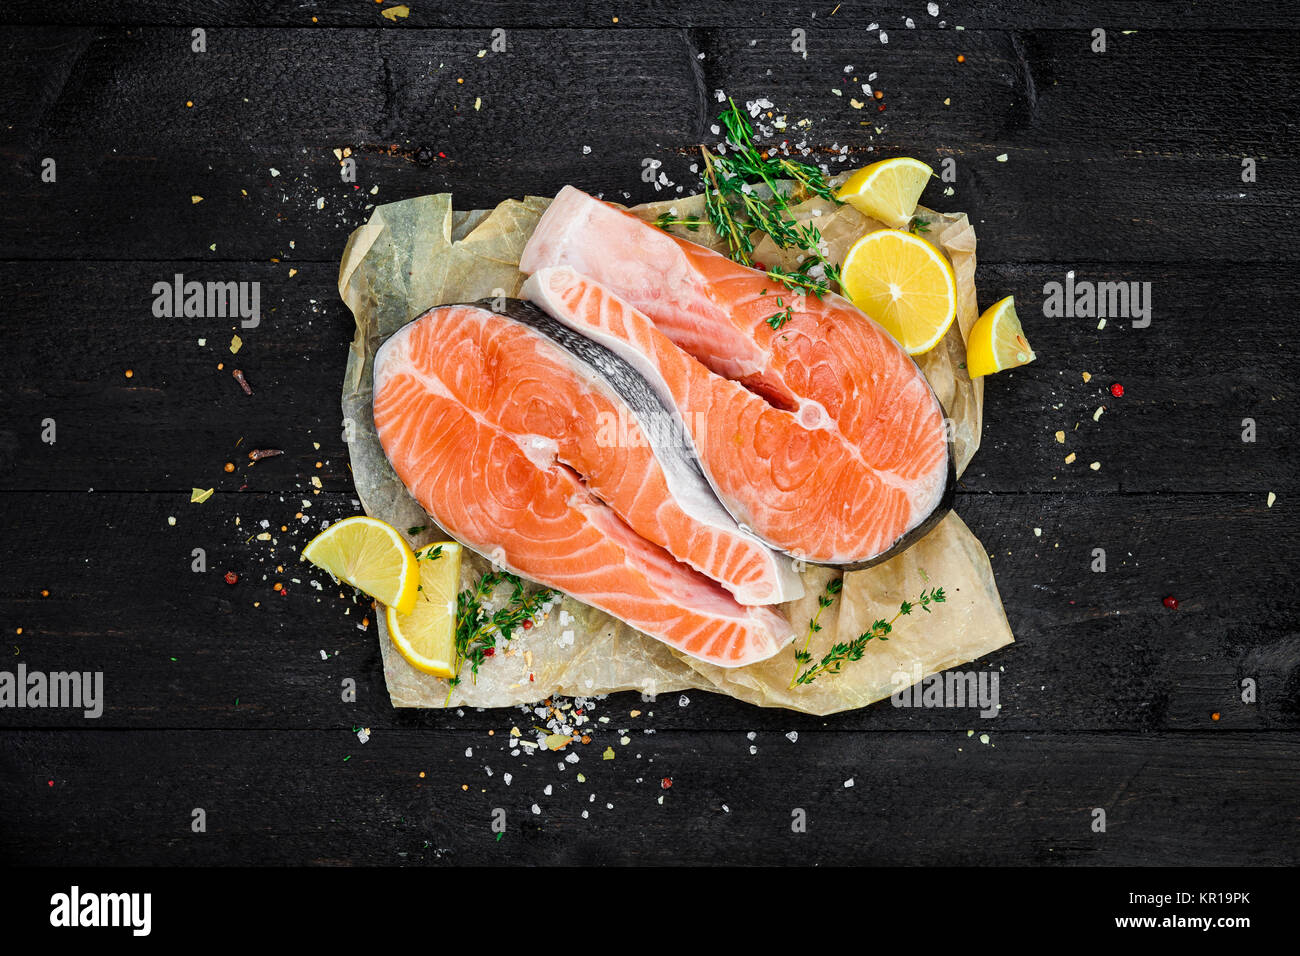 Salmon steaks on black wooden table top view Stock Photo